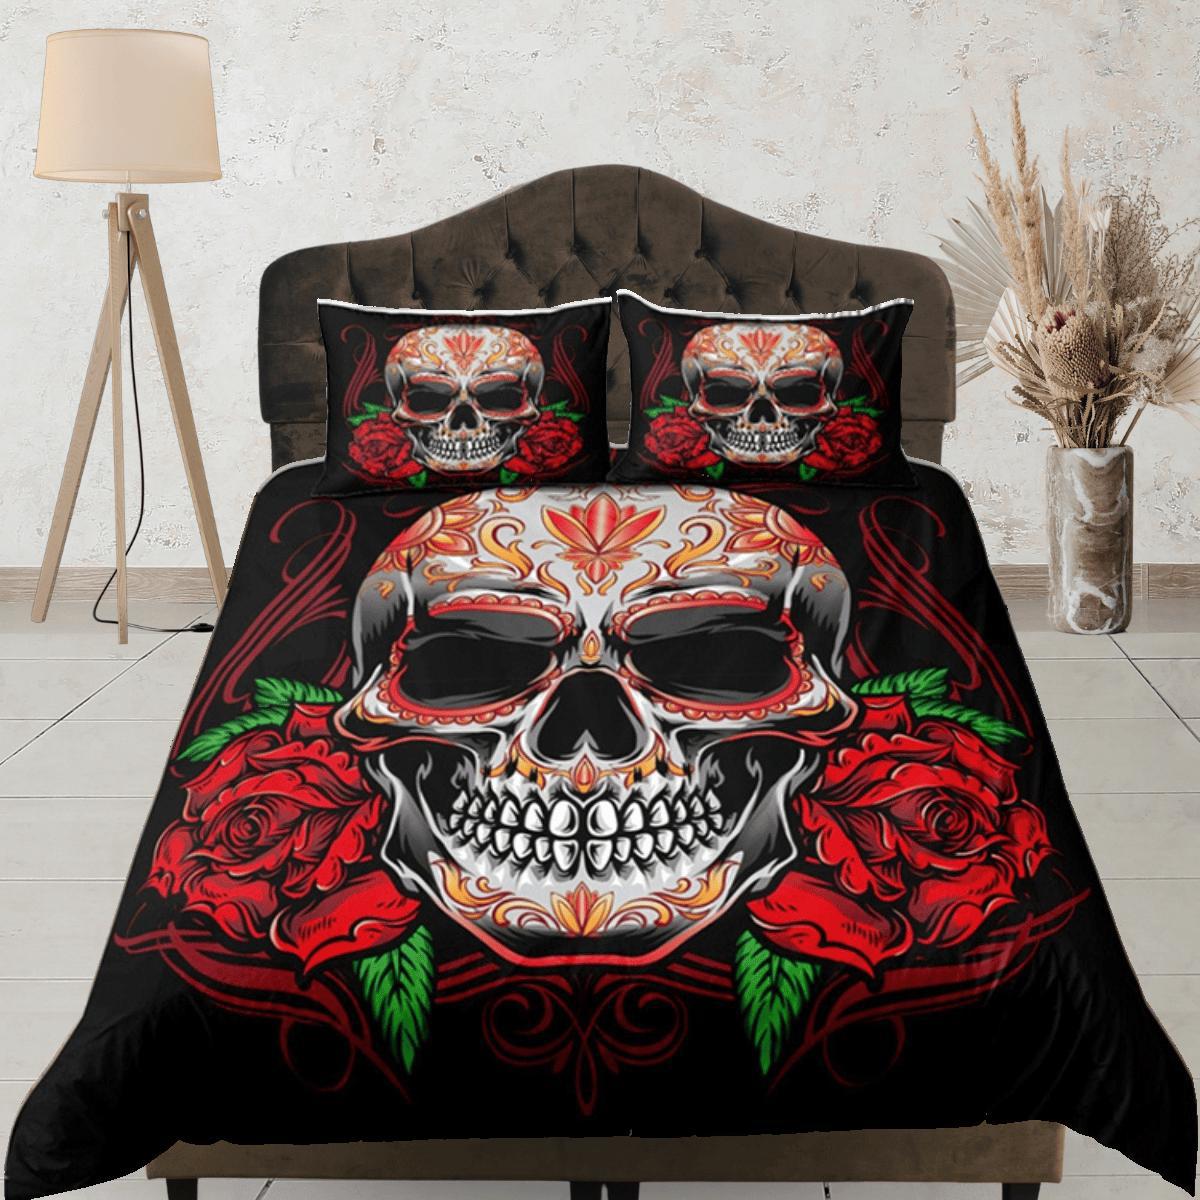 daintyduvet Skull and Roses Gothic Red Duvet Cover Set Bedspread, Dorm Bedding with Pillowcase